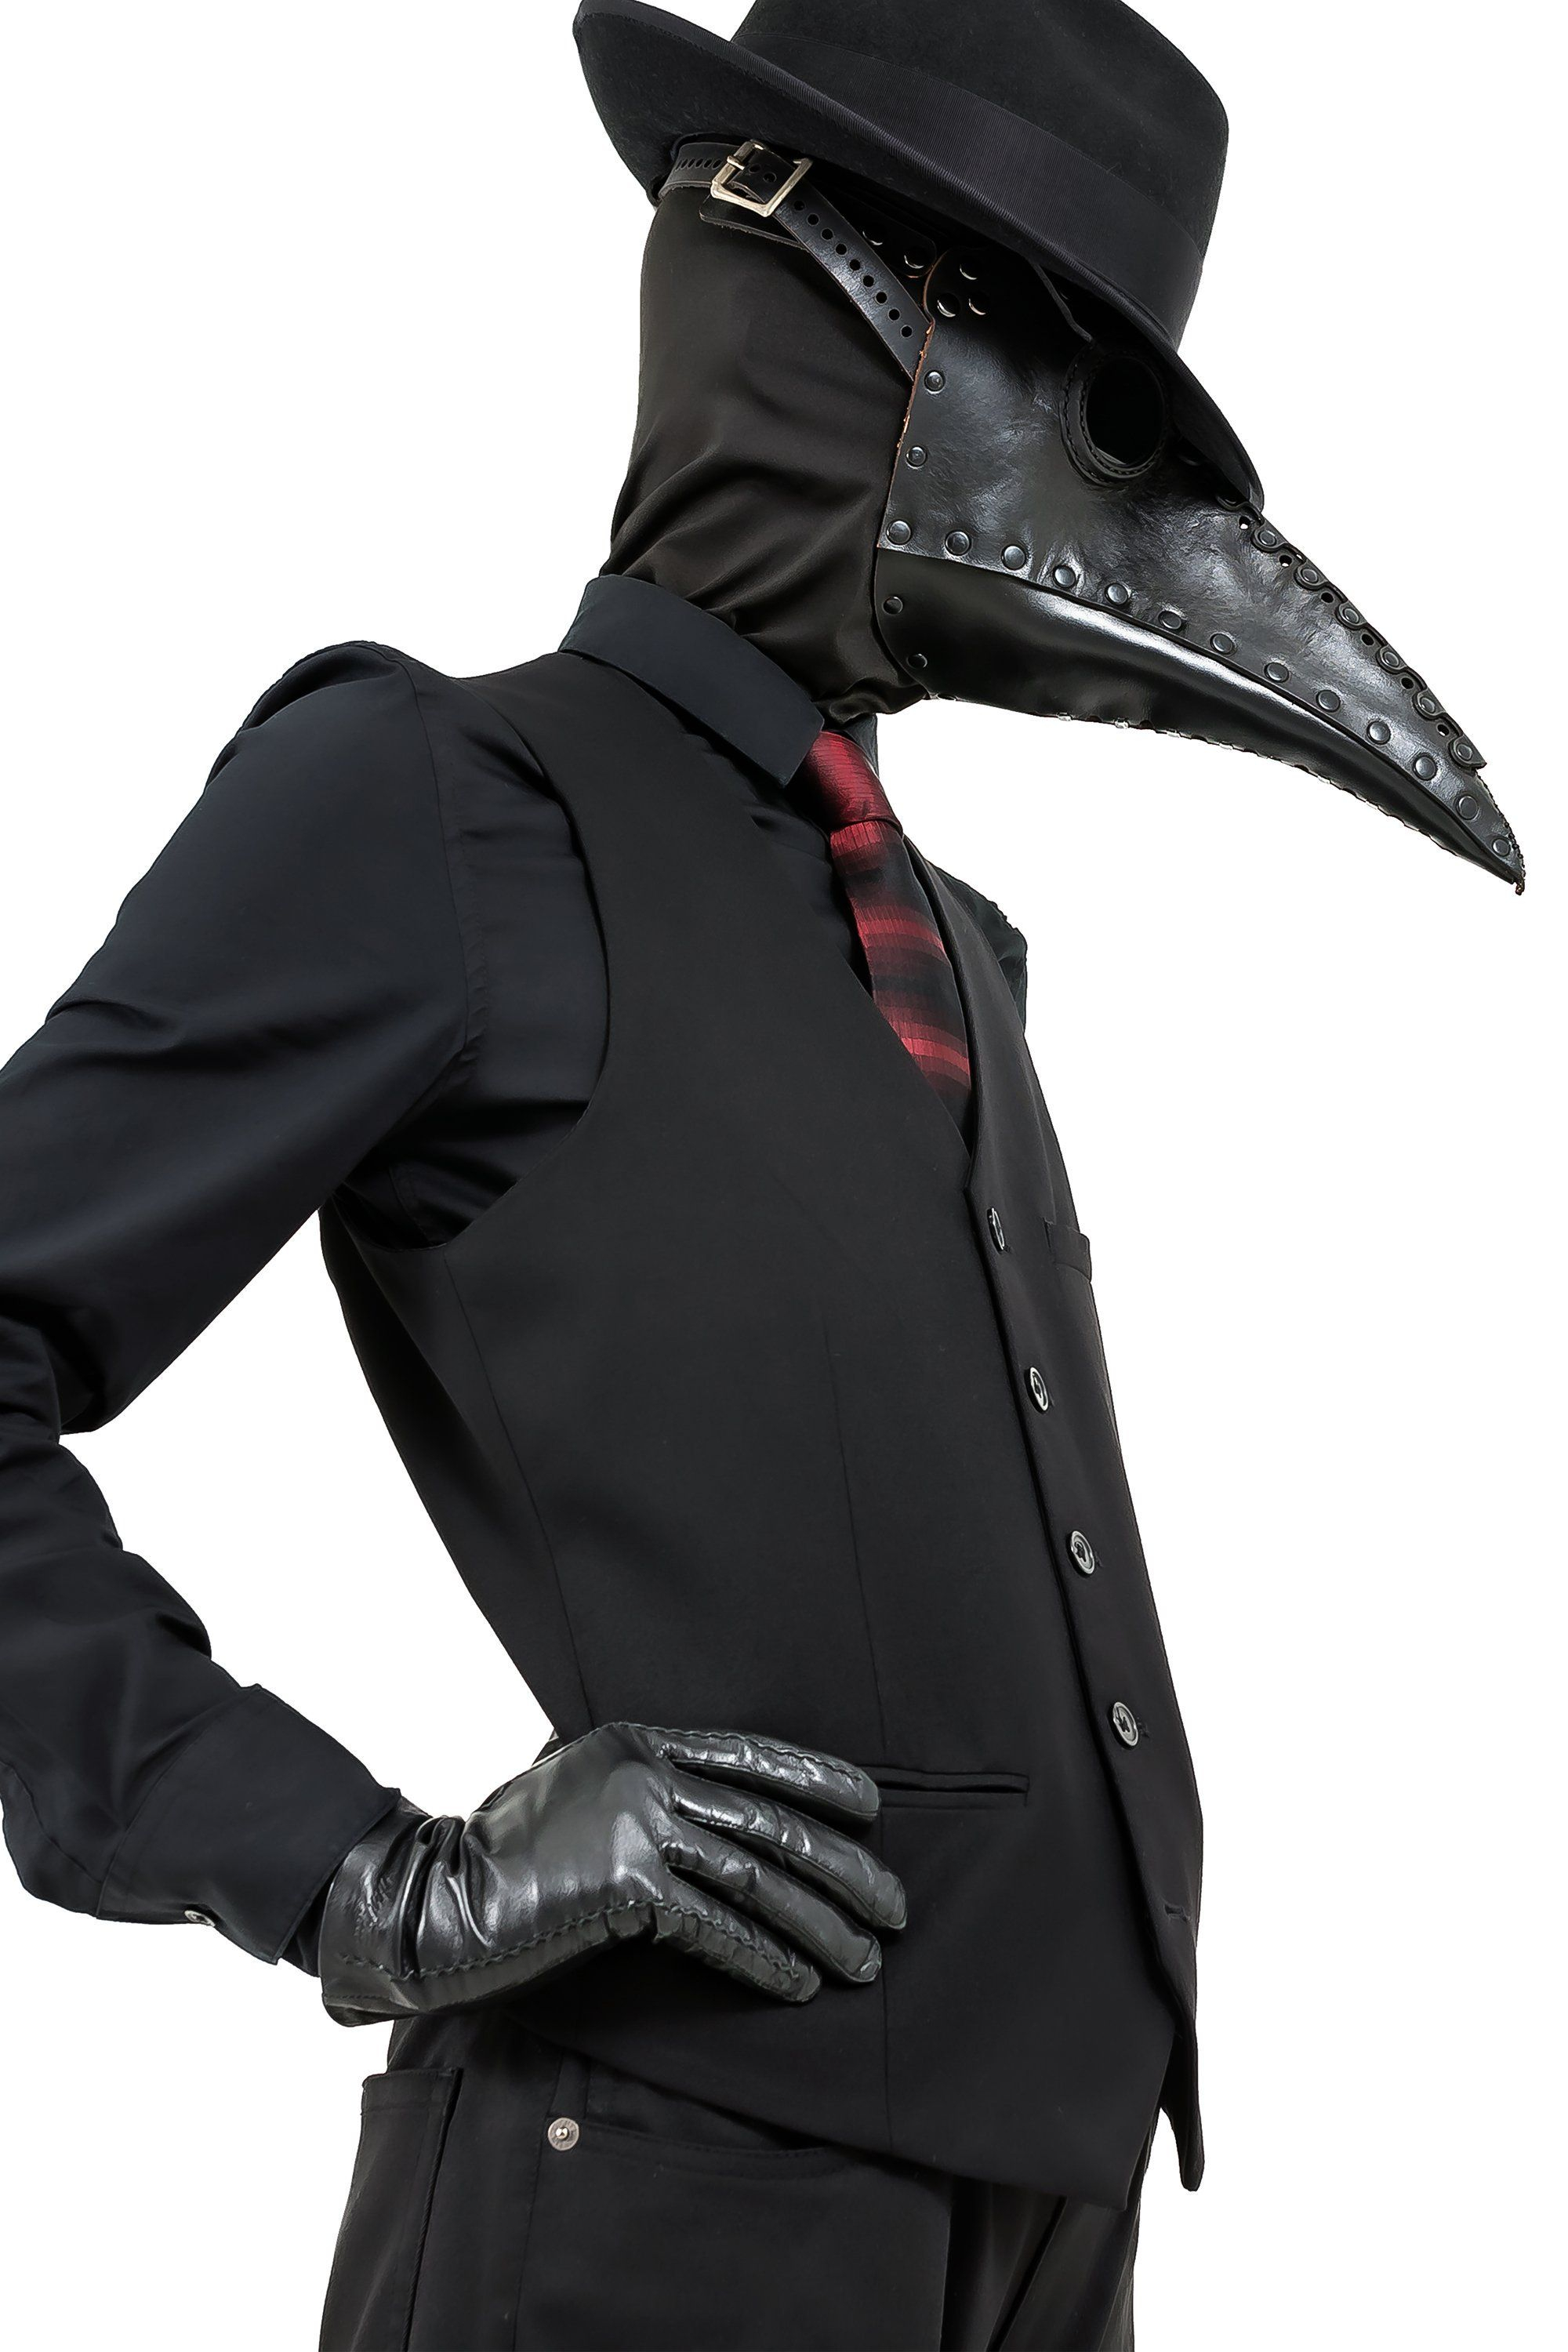 2000x3000 &ccedil;&#133;&reg;&auml;&raquo;&#152; Nitsuke / &atilde;&#131;&#154;&atilde;&#130;&sup1;&atilde;&#131;&#136;&atilde;&#131;&#158;&atilde;&#130;&sup1;&atilde;&#130;&macr;&atilde;&#129;&uml;&atilde;&#130;&sup1;&atilde;&#131;&frac14;&atilde;&#131;&#132; on Twitter | Plague doctor, Doctor images, Character outfits